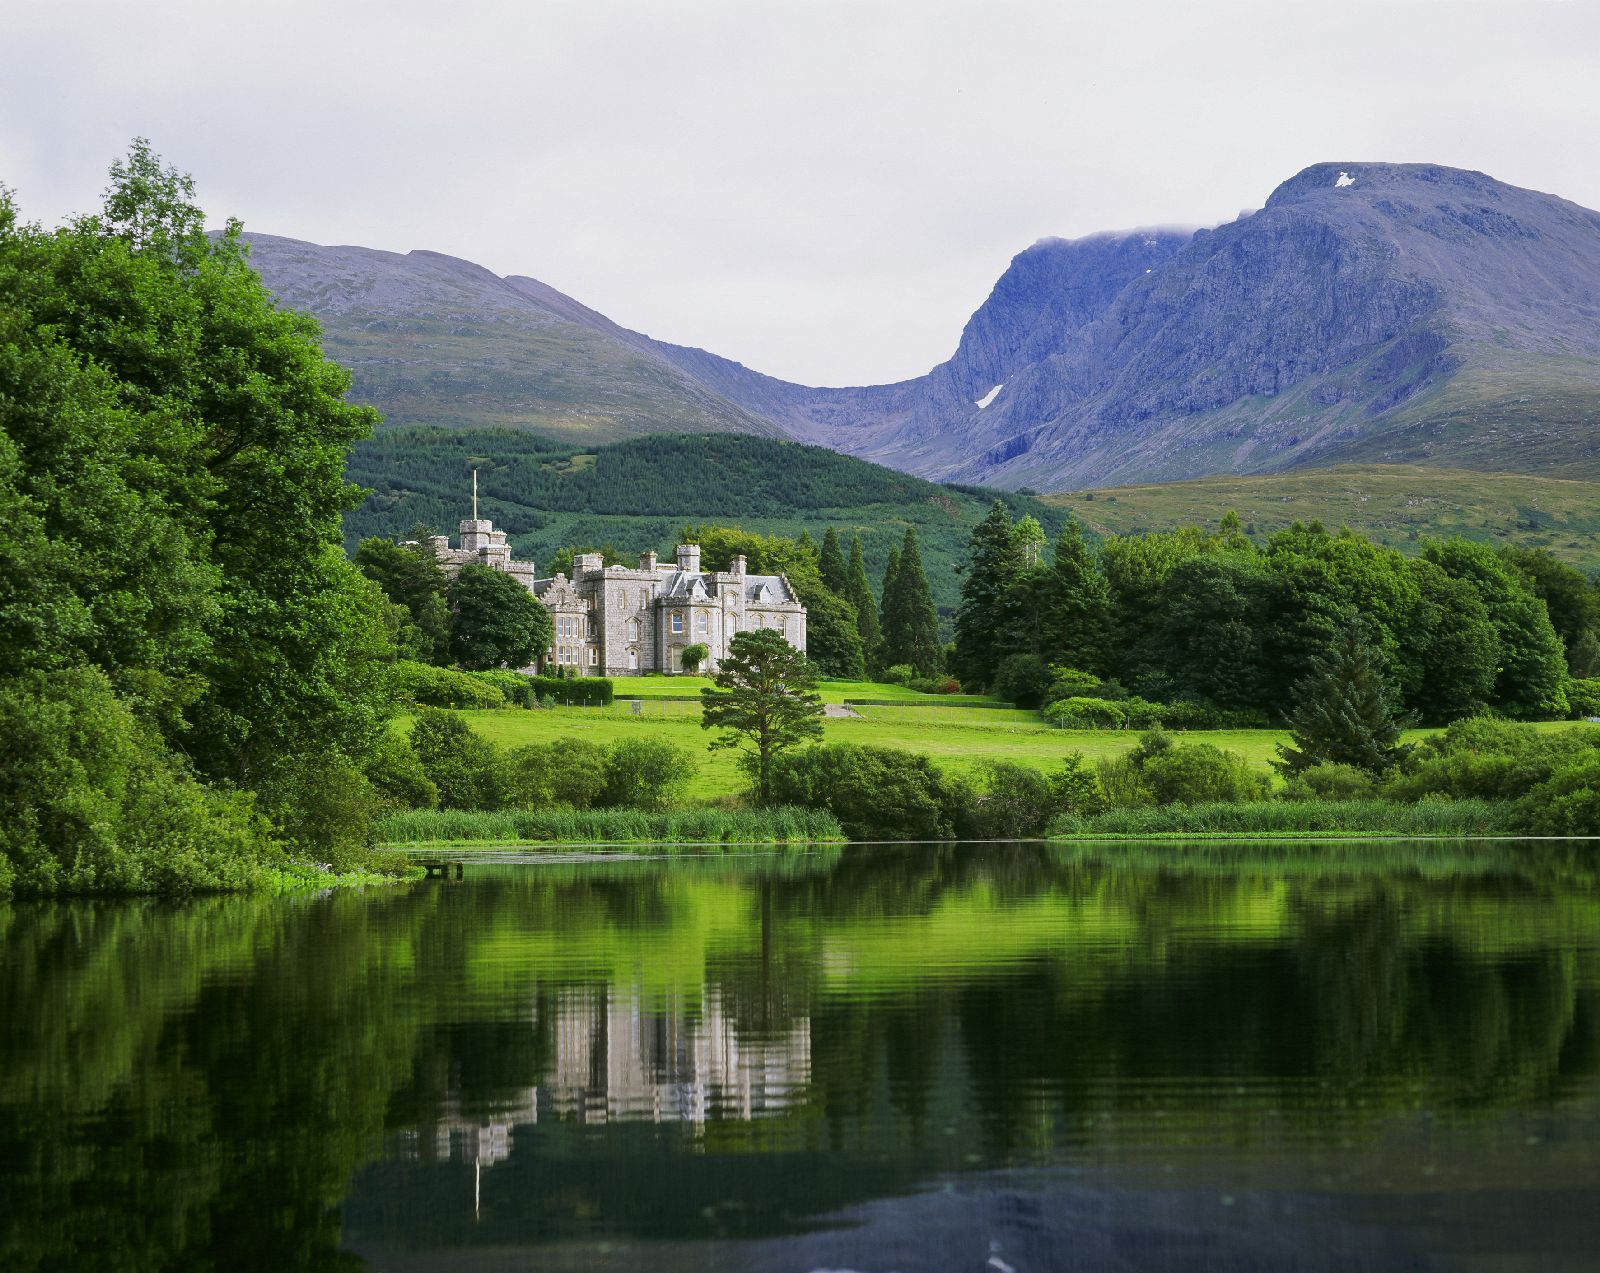 The Inverlochy Castle Hotel in Scotland with views of the loch and Ben Nevis